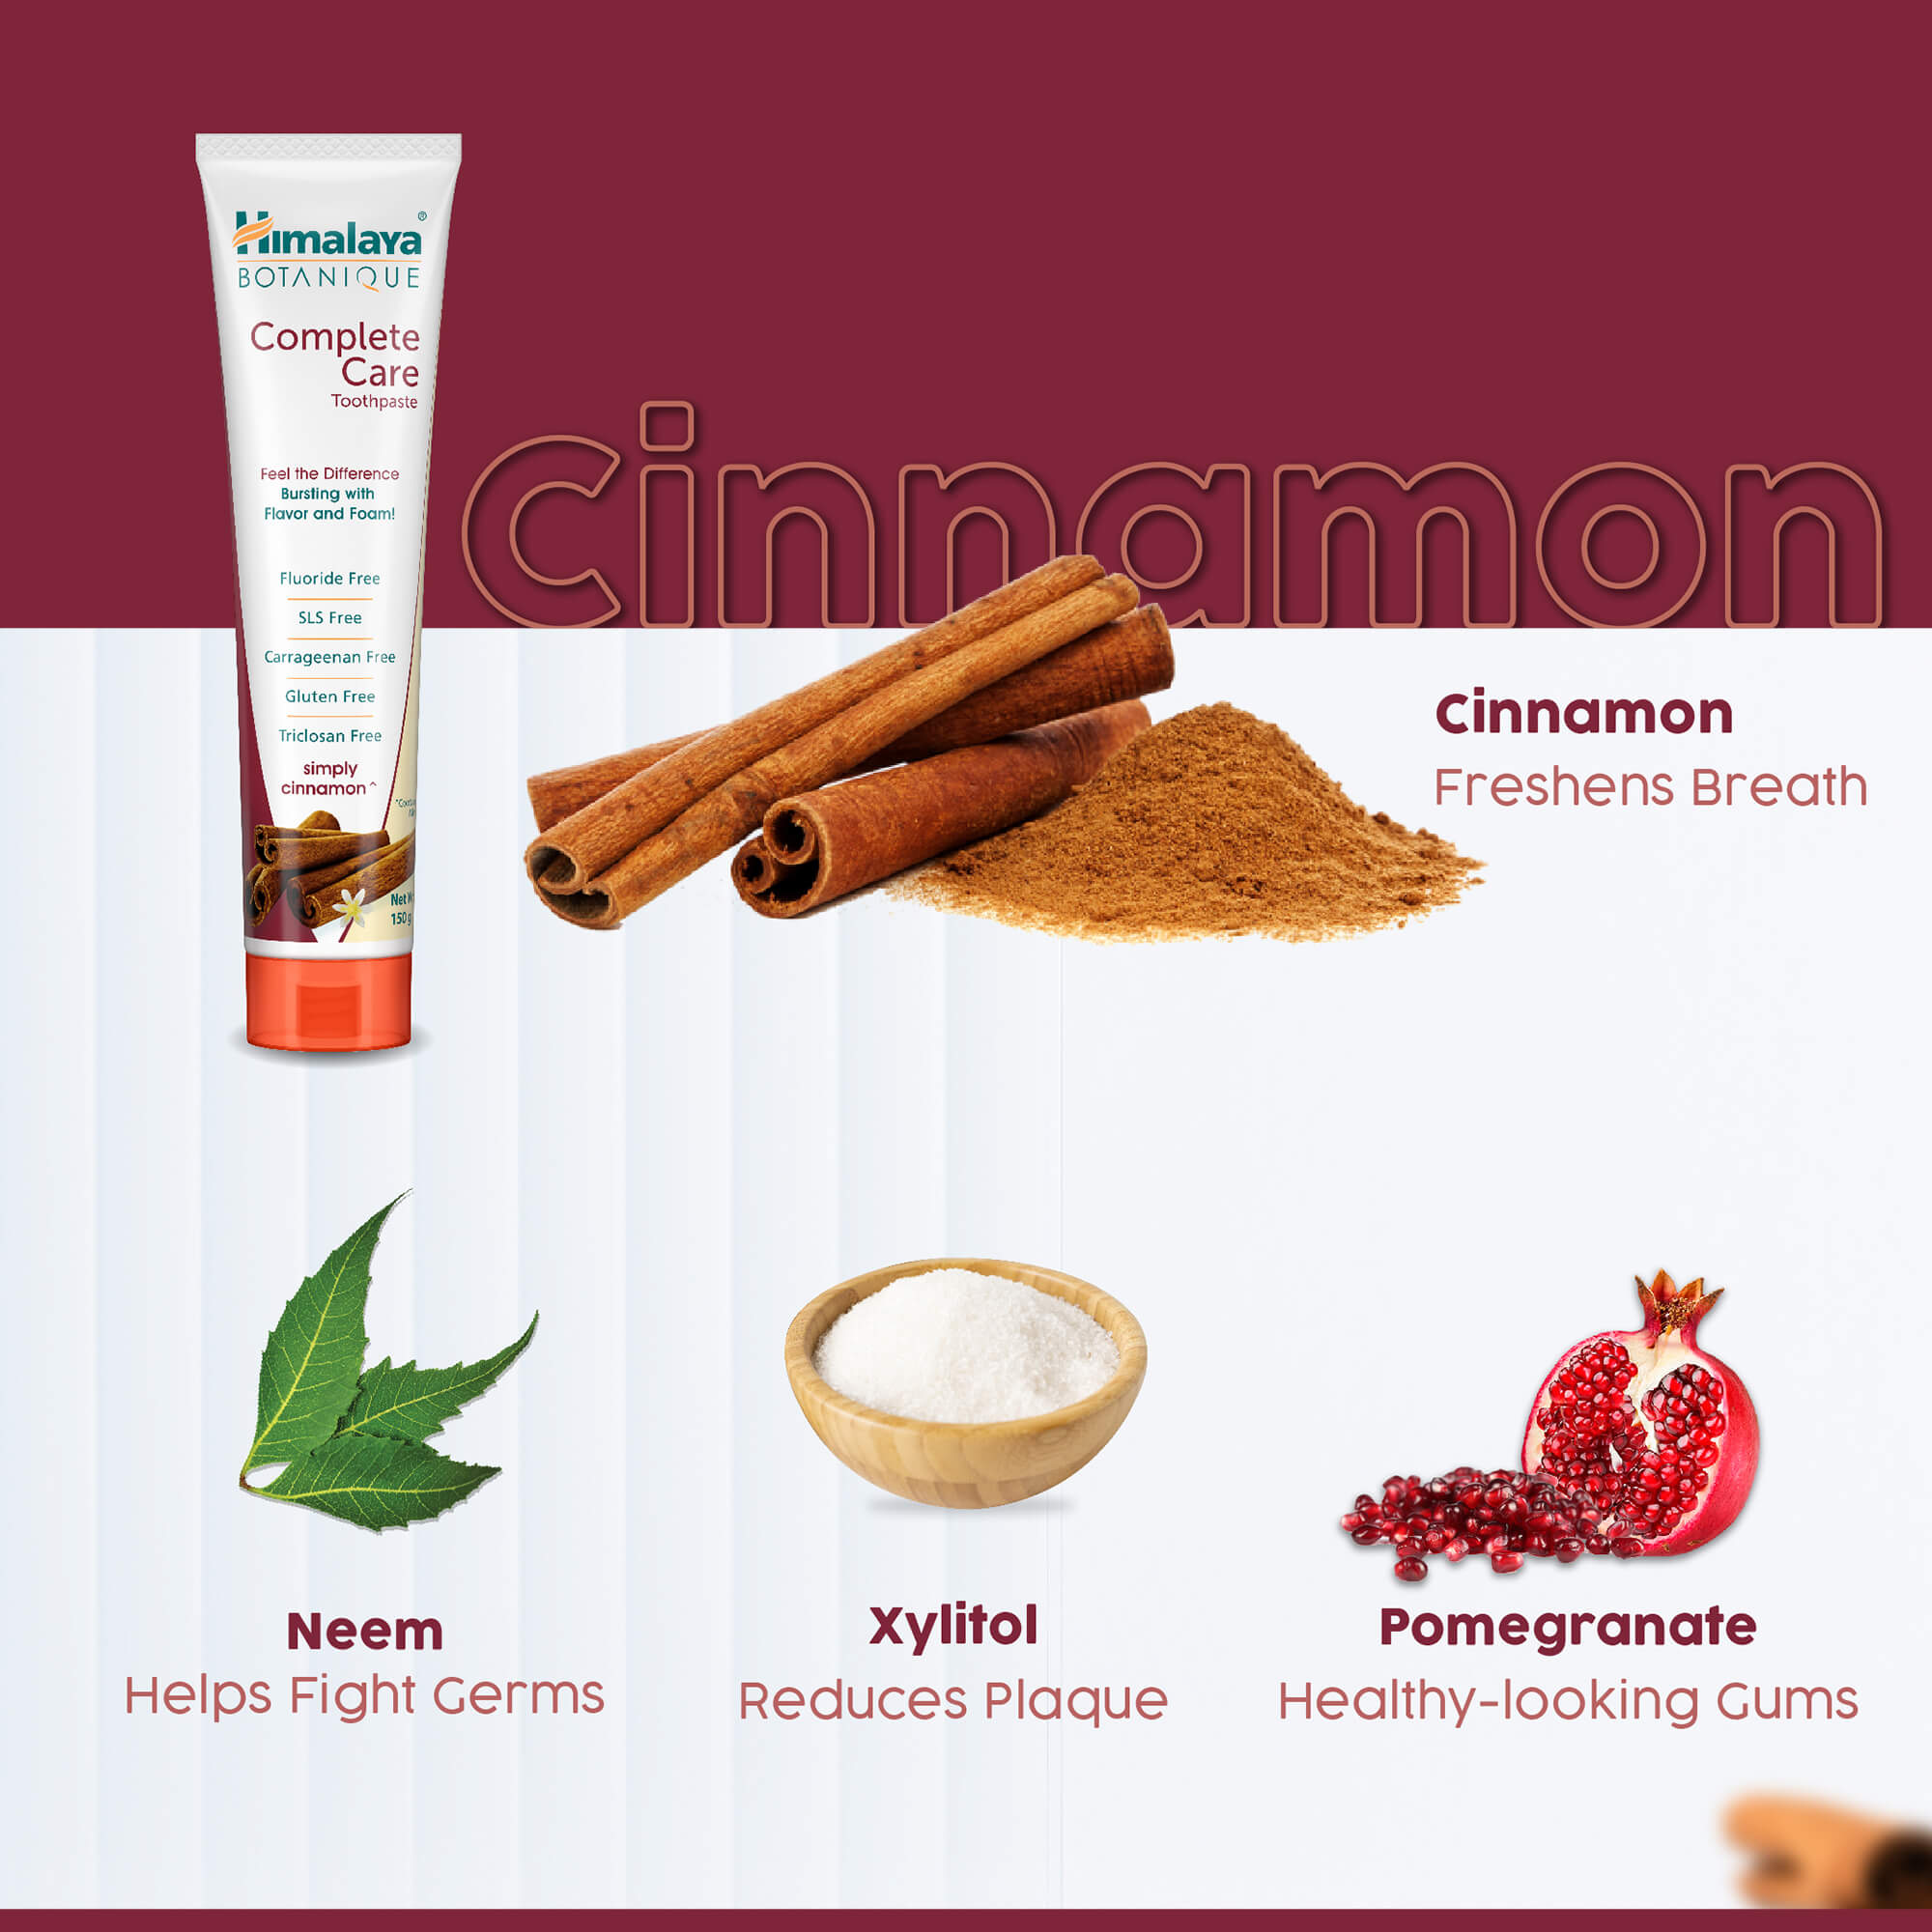  Himalaya BOTANIQUE Complete Care Toothpaste (Simply Cinnamon) - Neem, Xylitol, & Pomegranate